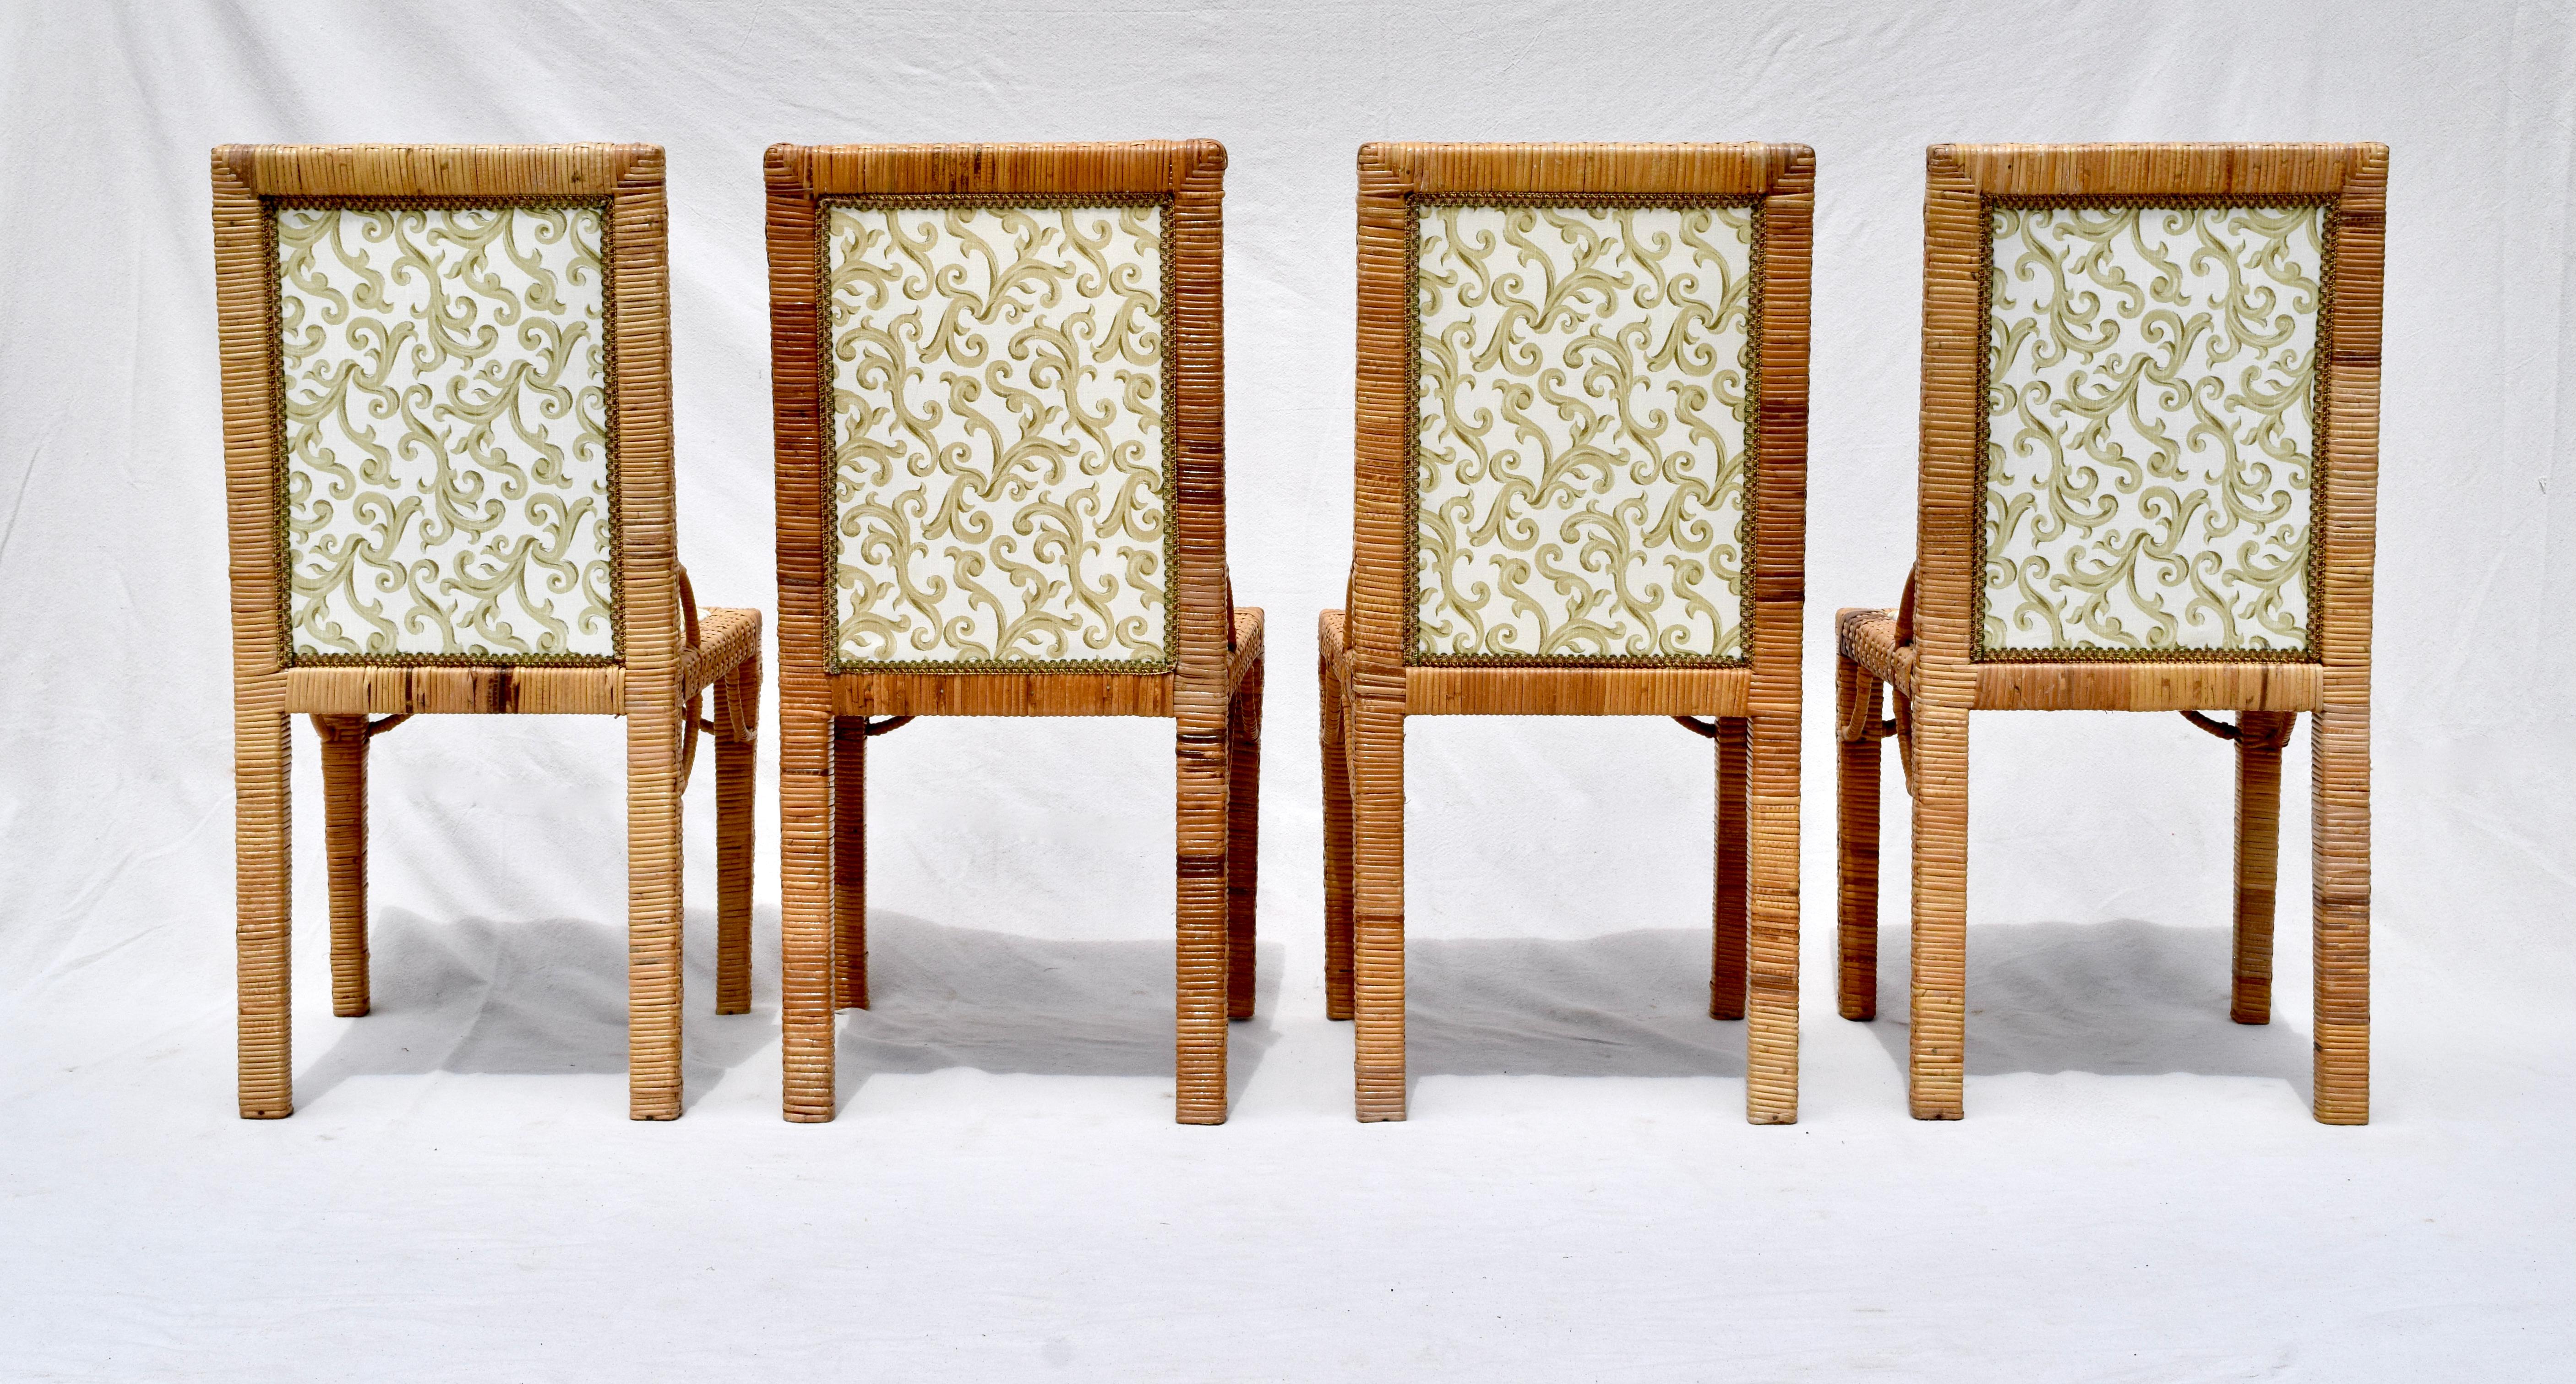 Set of six a basket weave Parsons dining chairs fully detailed in new vintage stock Chris Stone cotton upholstery attributed to Bielecky Brothers. Of substantial Raffia & wood construction the set has been beautifully maintained over the years in